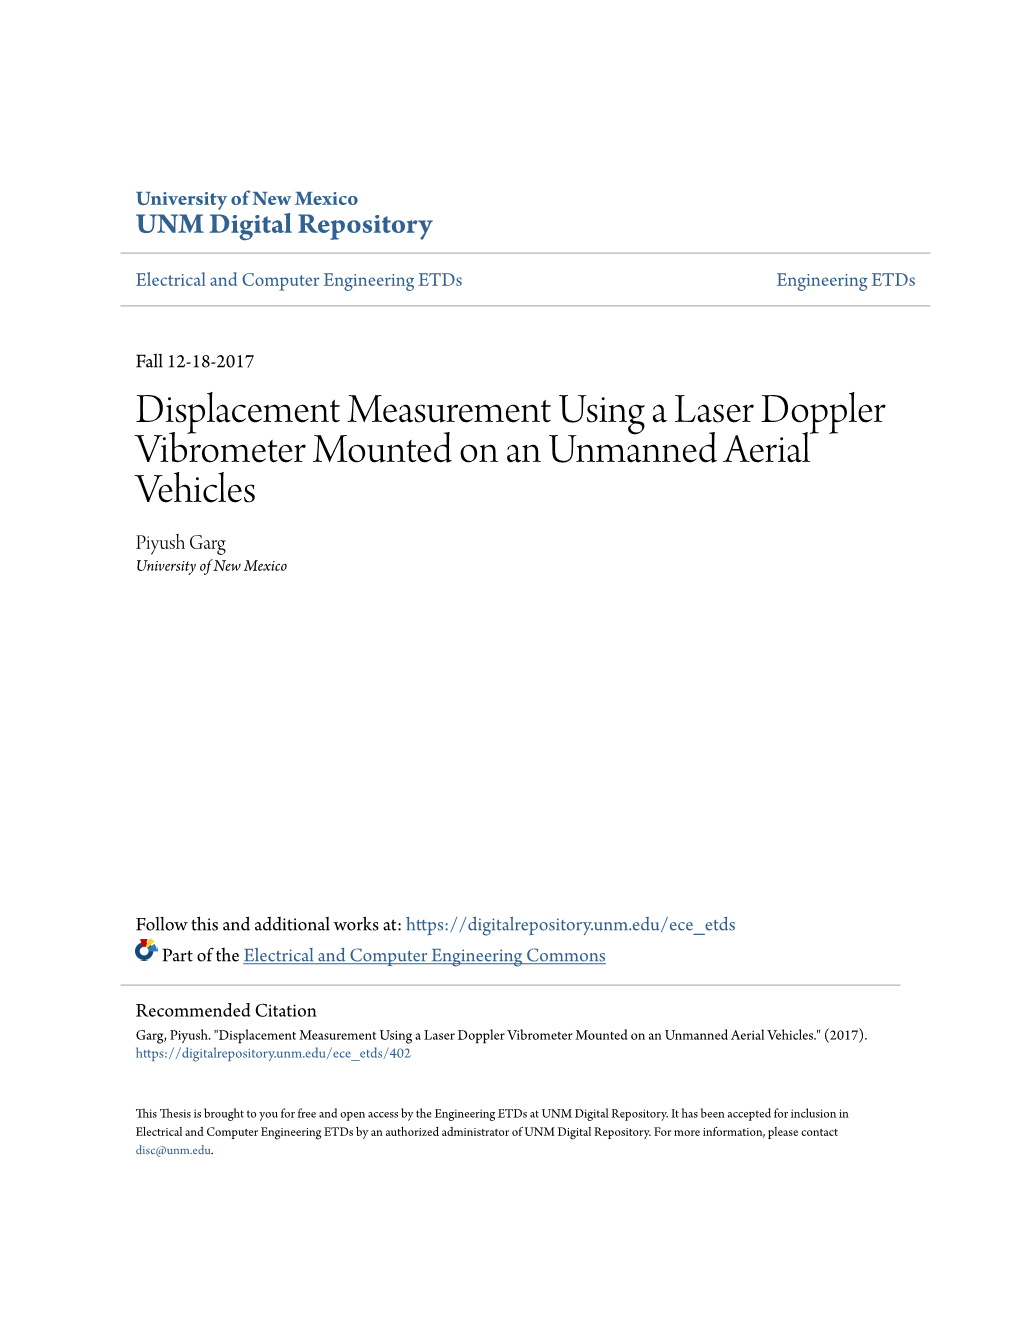 Displacement Measurement Using a Laser Doppler Vibrometer Mounted on an Unmanned Aerial Vehicles Piyush Garg University of New Mexico